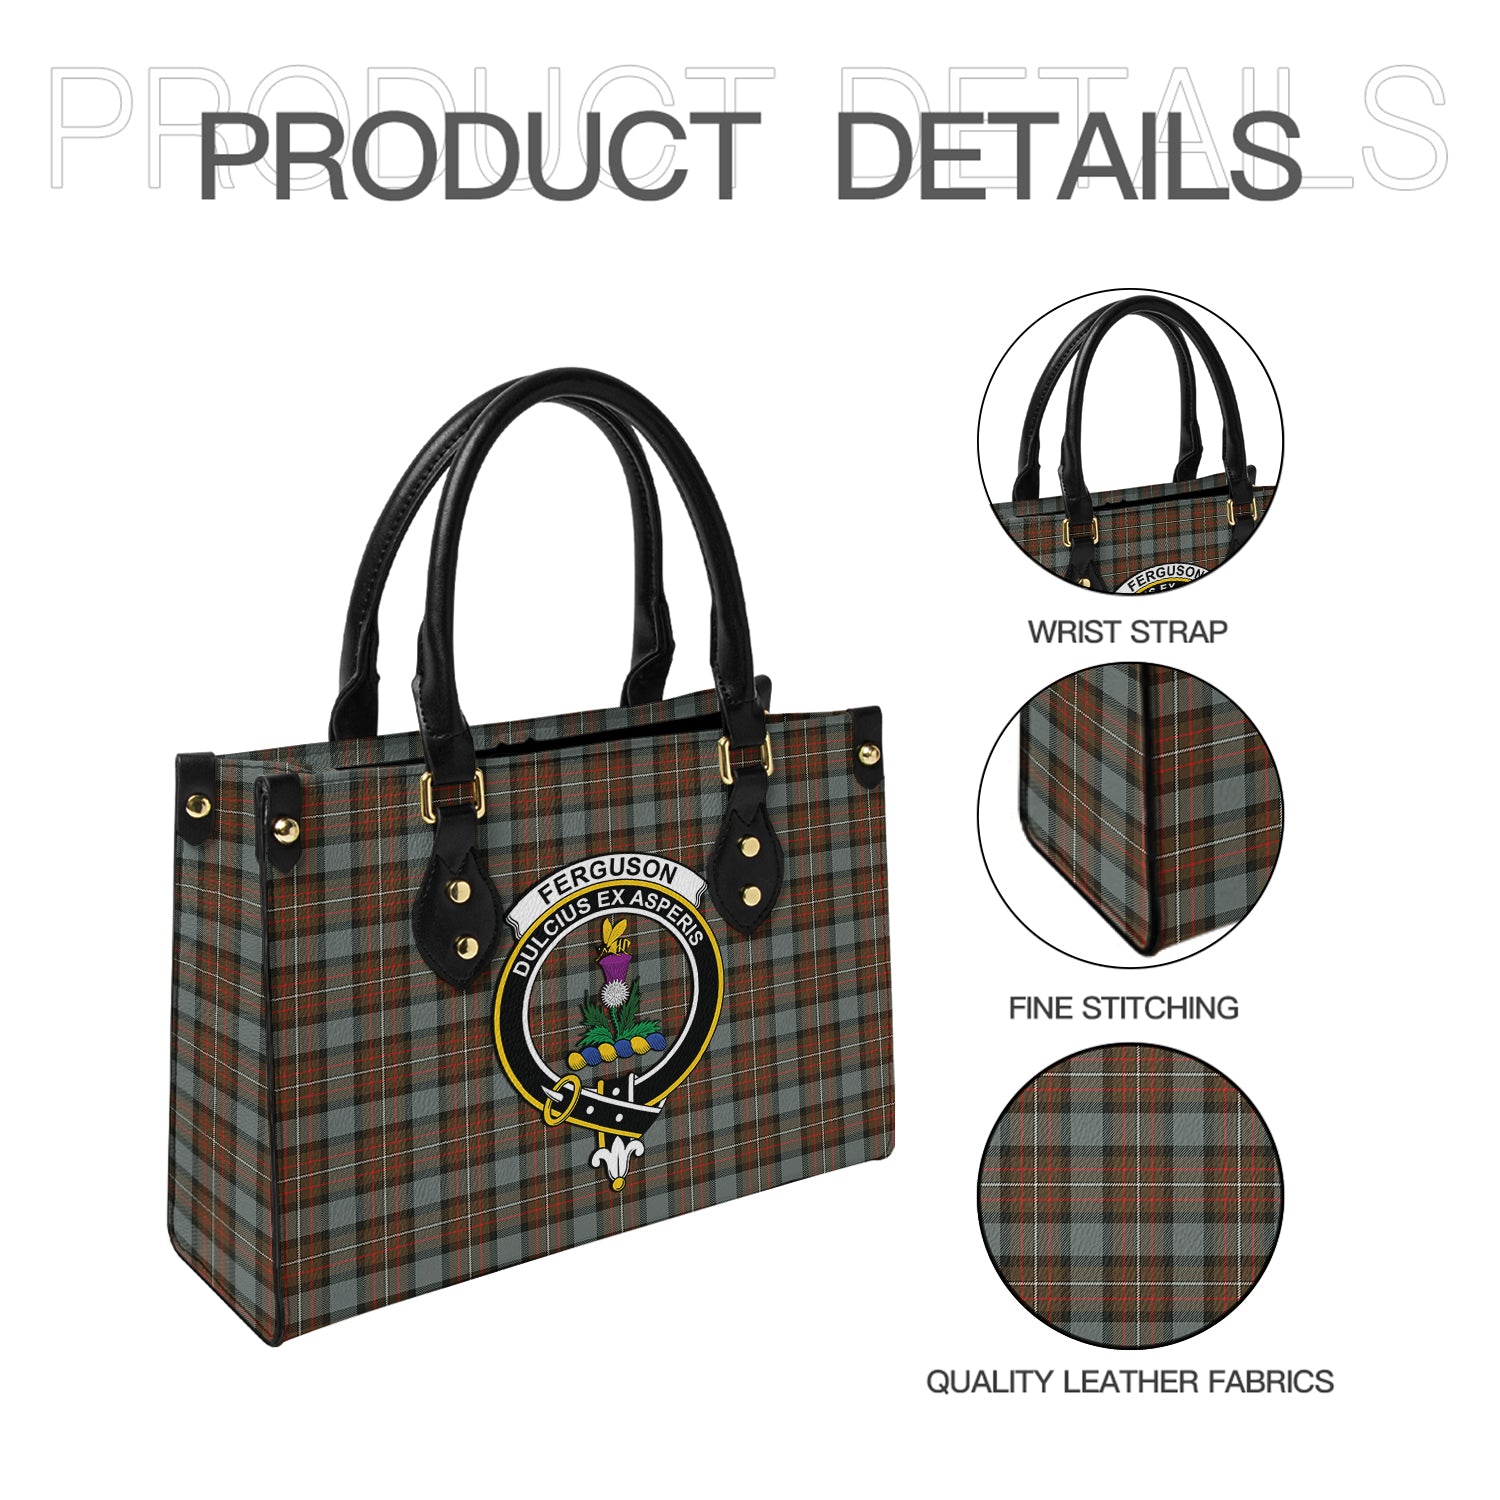 ferguson-weathered-tartan-leather-bag-with-family-crest